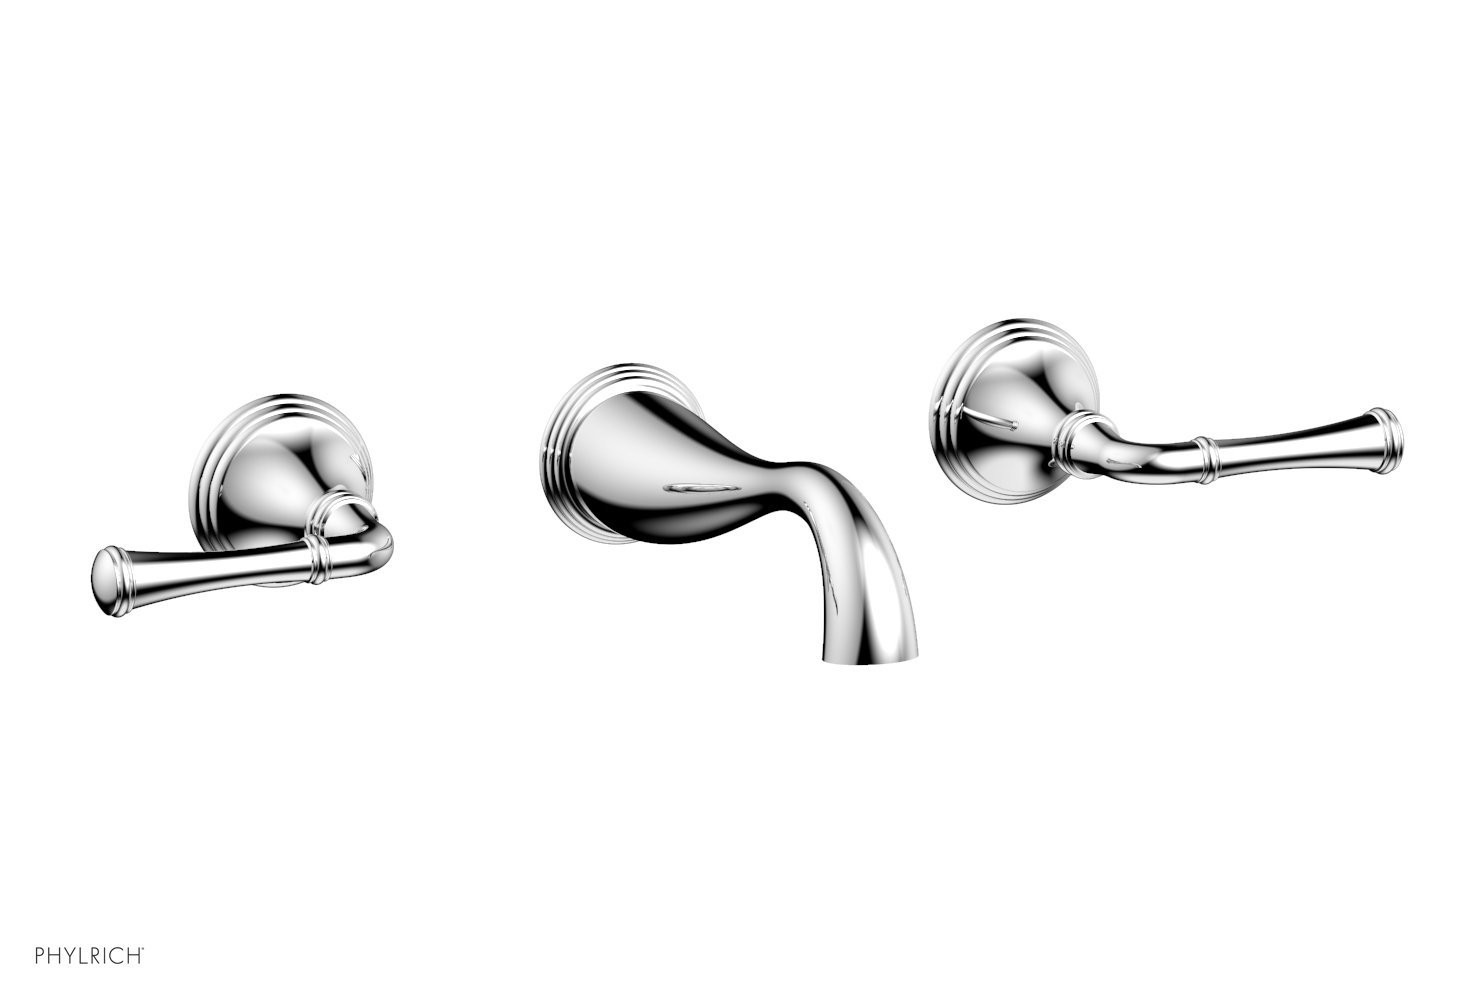 PHYLRICH D1205 3RING THREE HOLES WIDESPREAD WALL TUB SET WITH STRAIGHT LEVER HANDLES